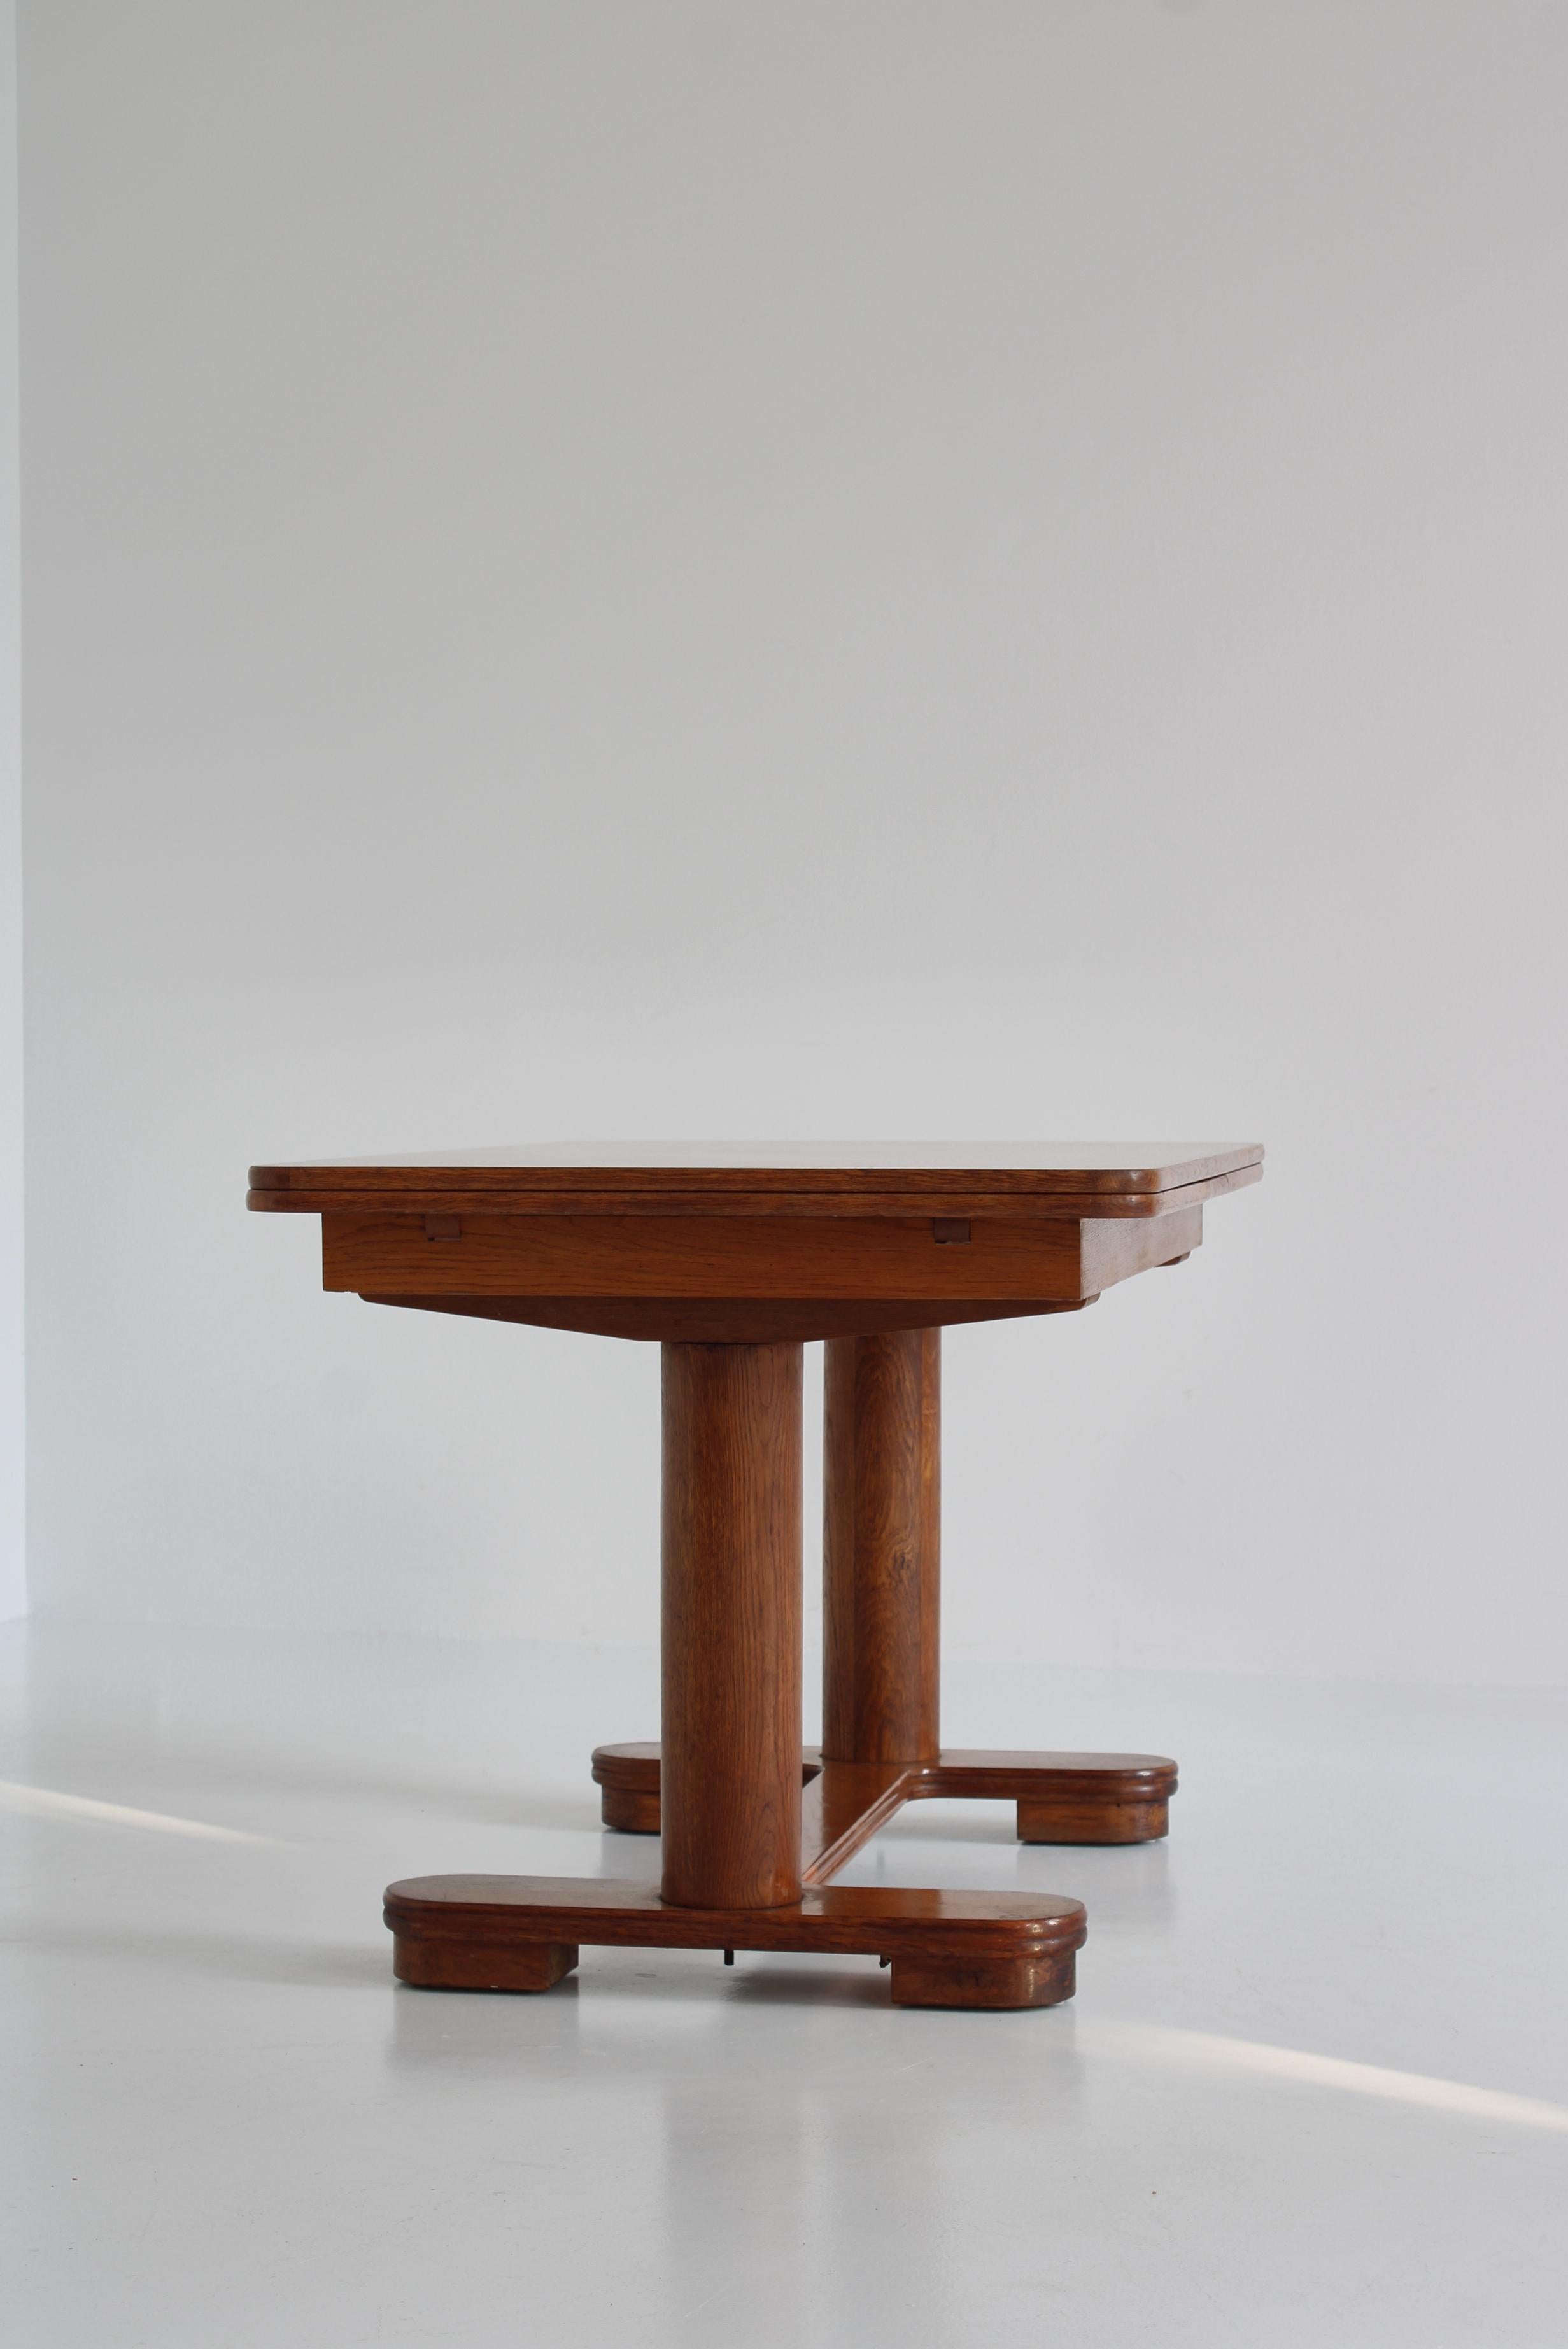 Art Deco Table by Danish Cabinetmaker in Patinated Oak, 1930s In Good Condition For Sale In Odense, DK